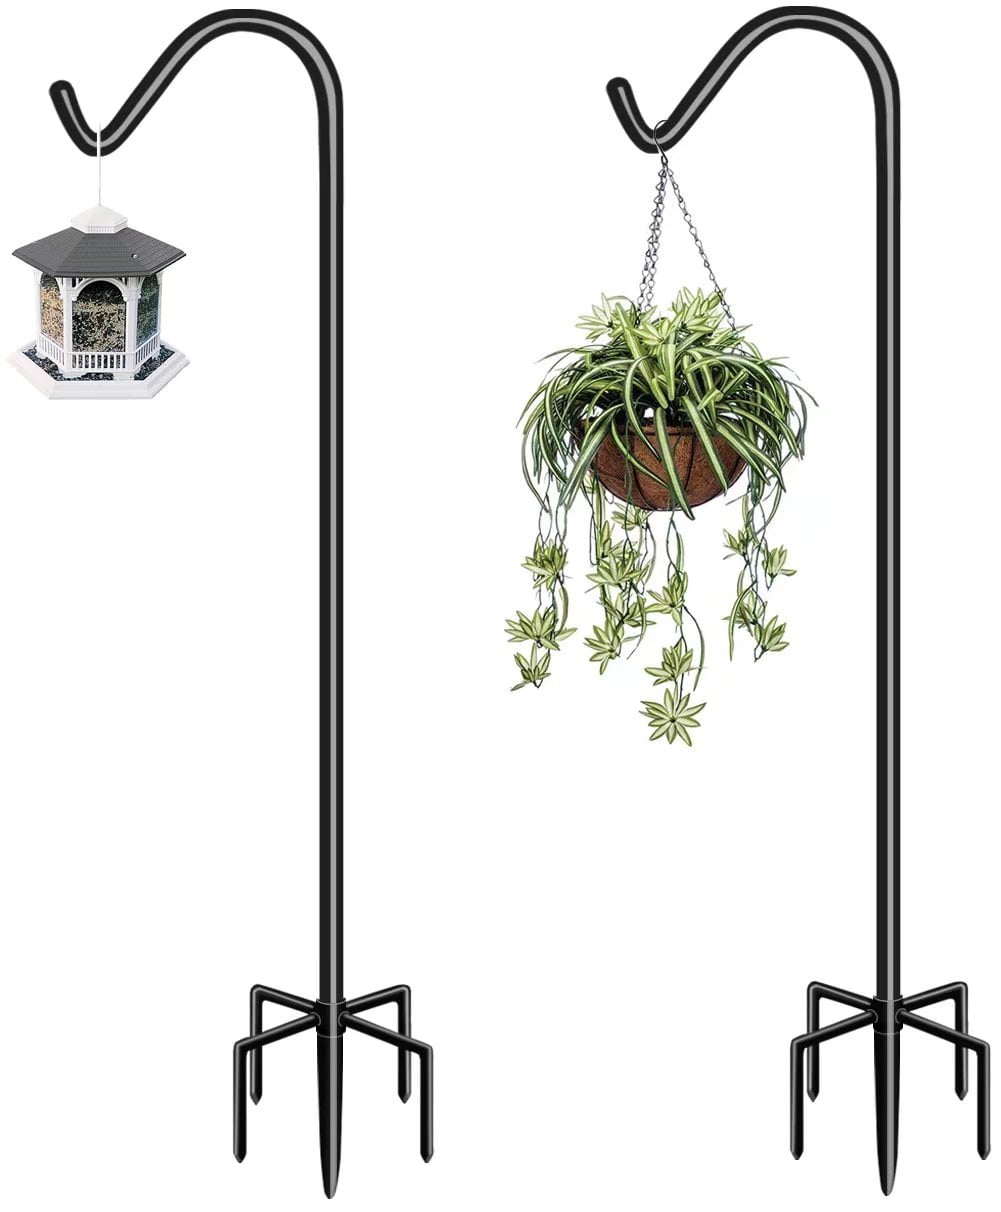 Adjustable Heavy Duty Bird Feeder Pole with 5 Prong Base for Solar Lanterns Planter Black & 2 Packs Koutemie 60 Inch Outdoor Shepherd Hook for Hanging 